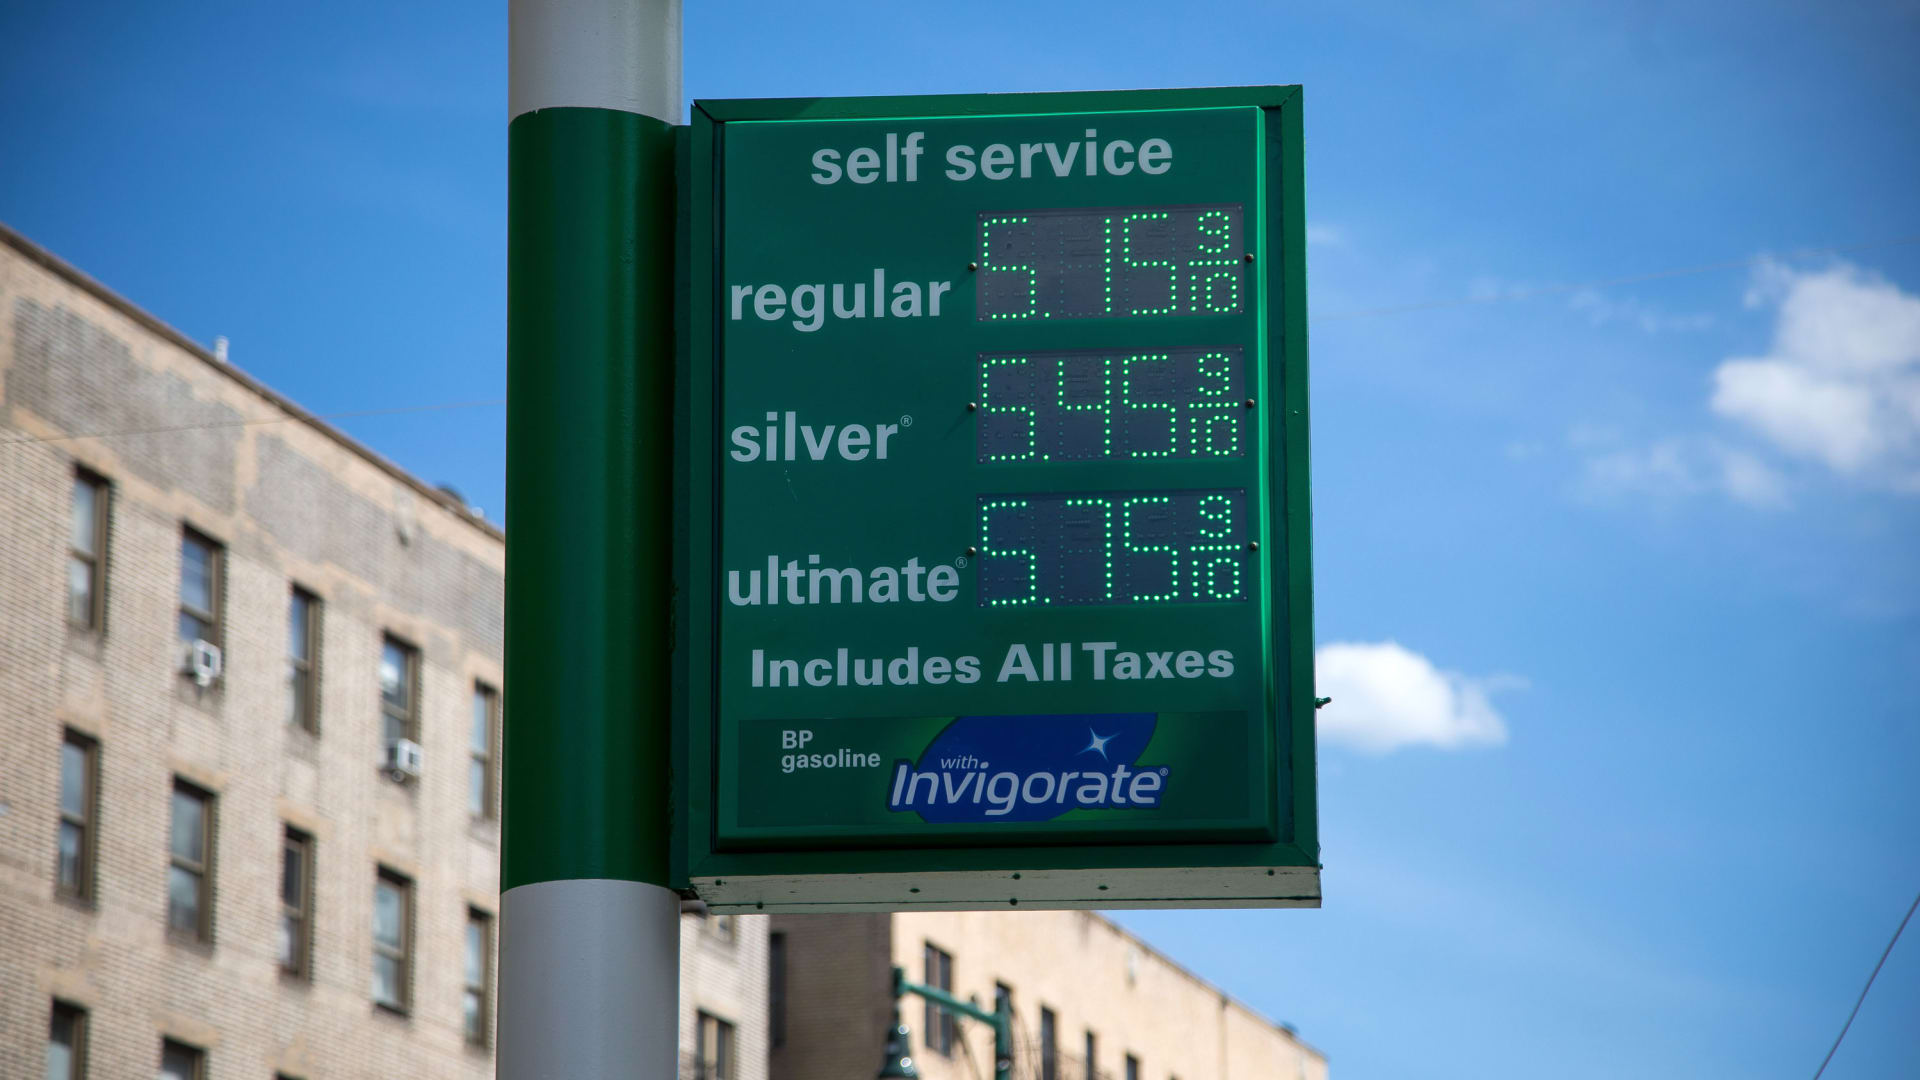 Gas prices are displayed at a gas station in Brooklyn on June 10, 2022.